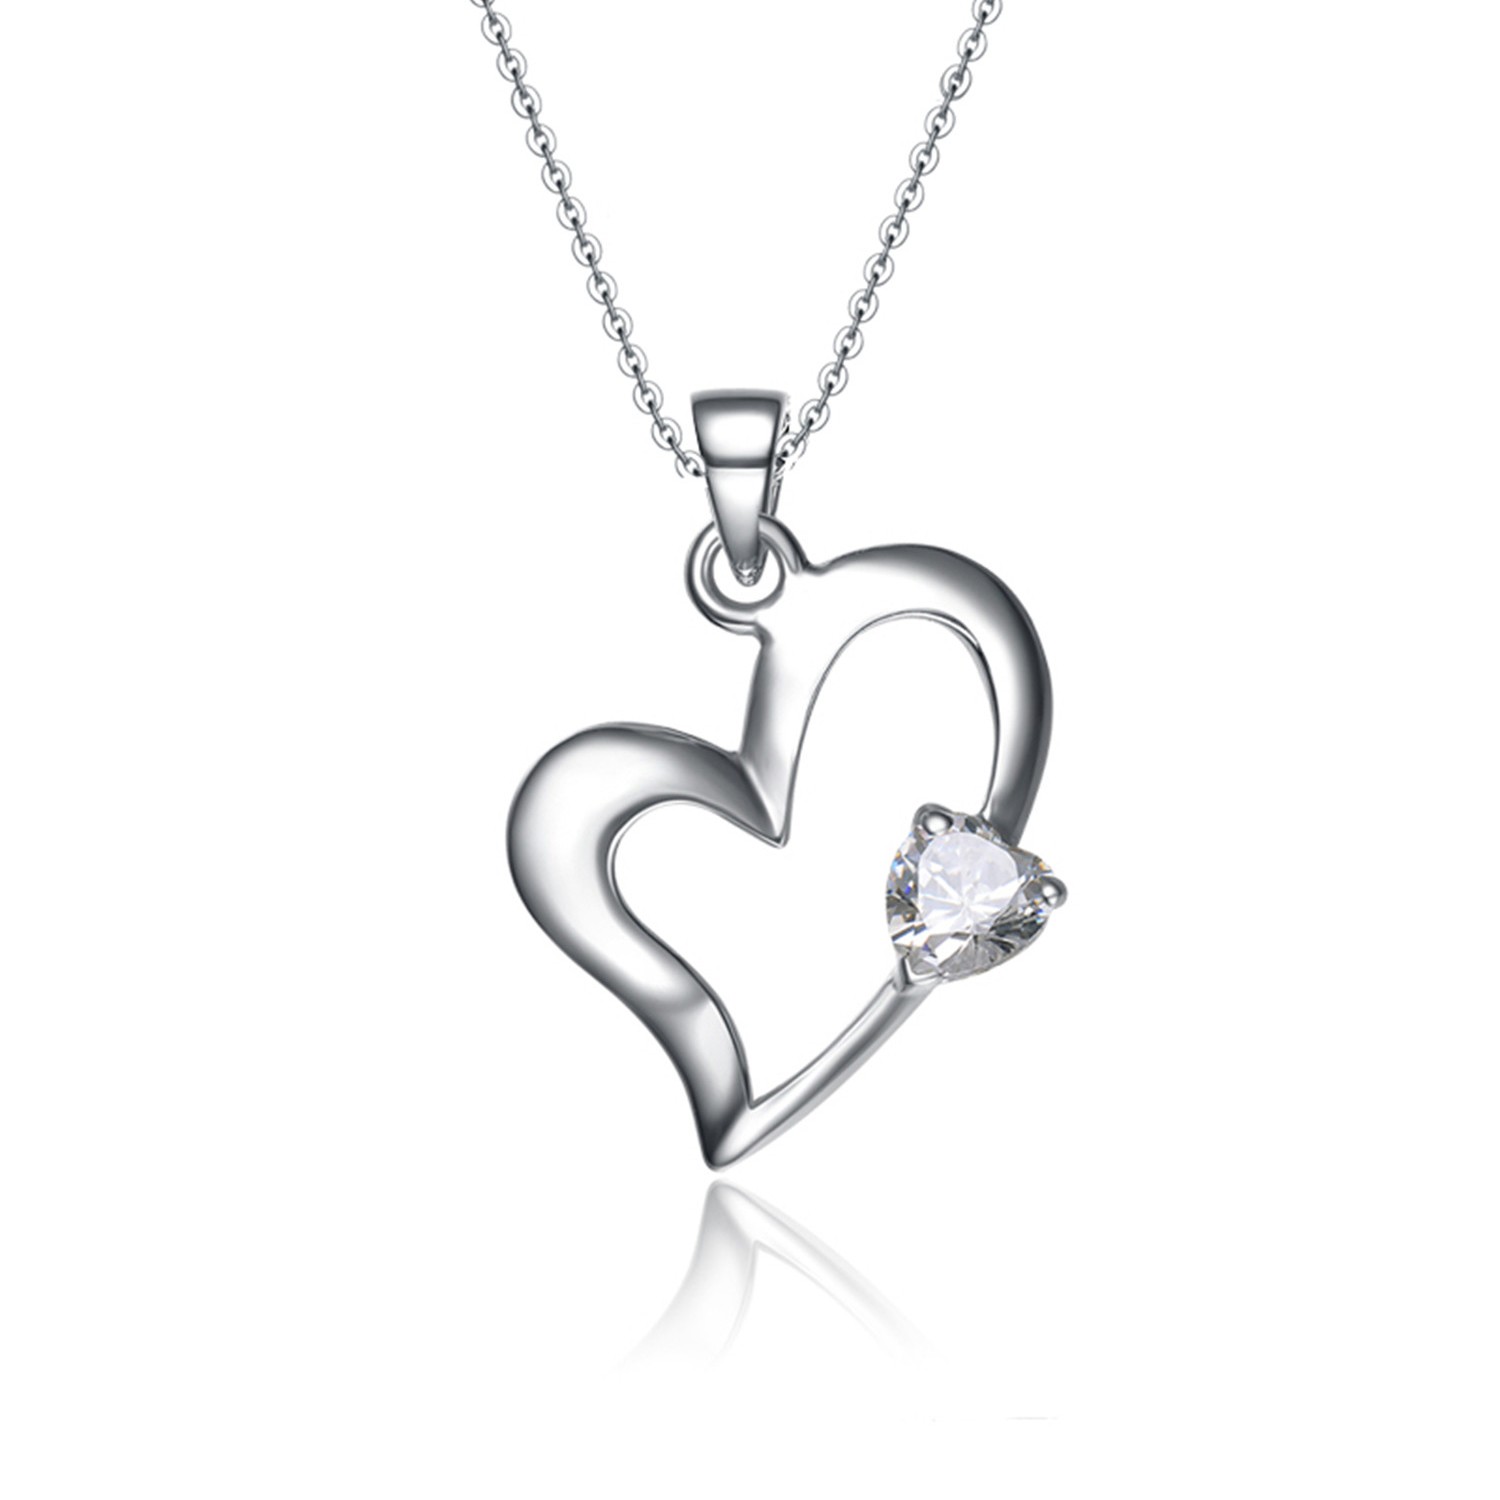 Jewelry Wholesale Women Necklace Wedding 925 Sterling Silver Cubic Zirconia Heart Pendant Necklace